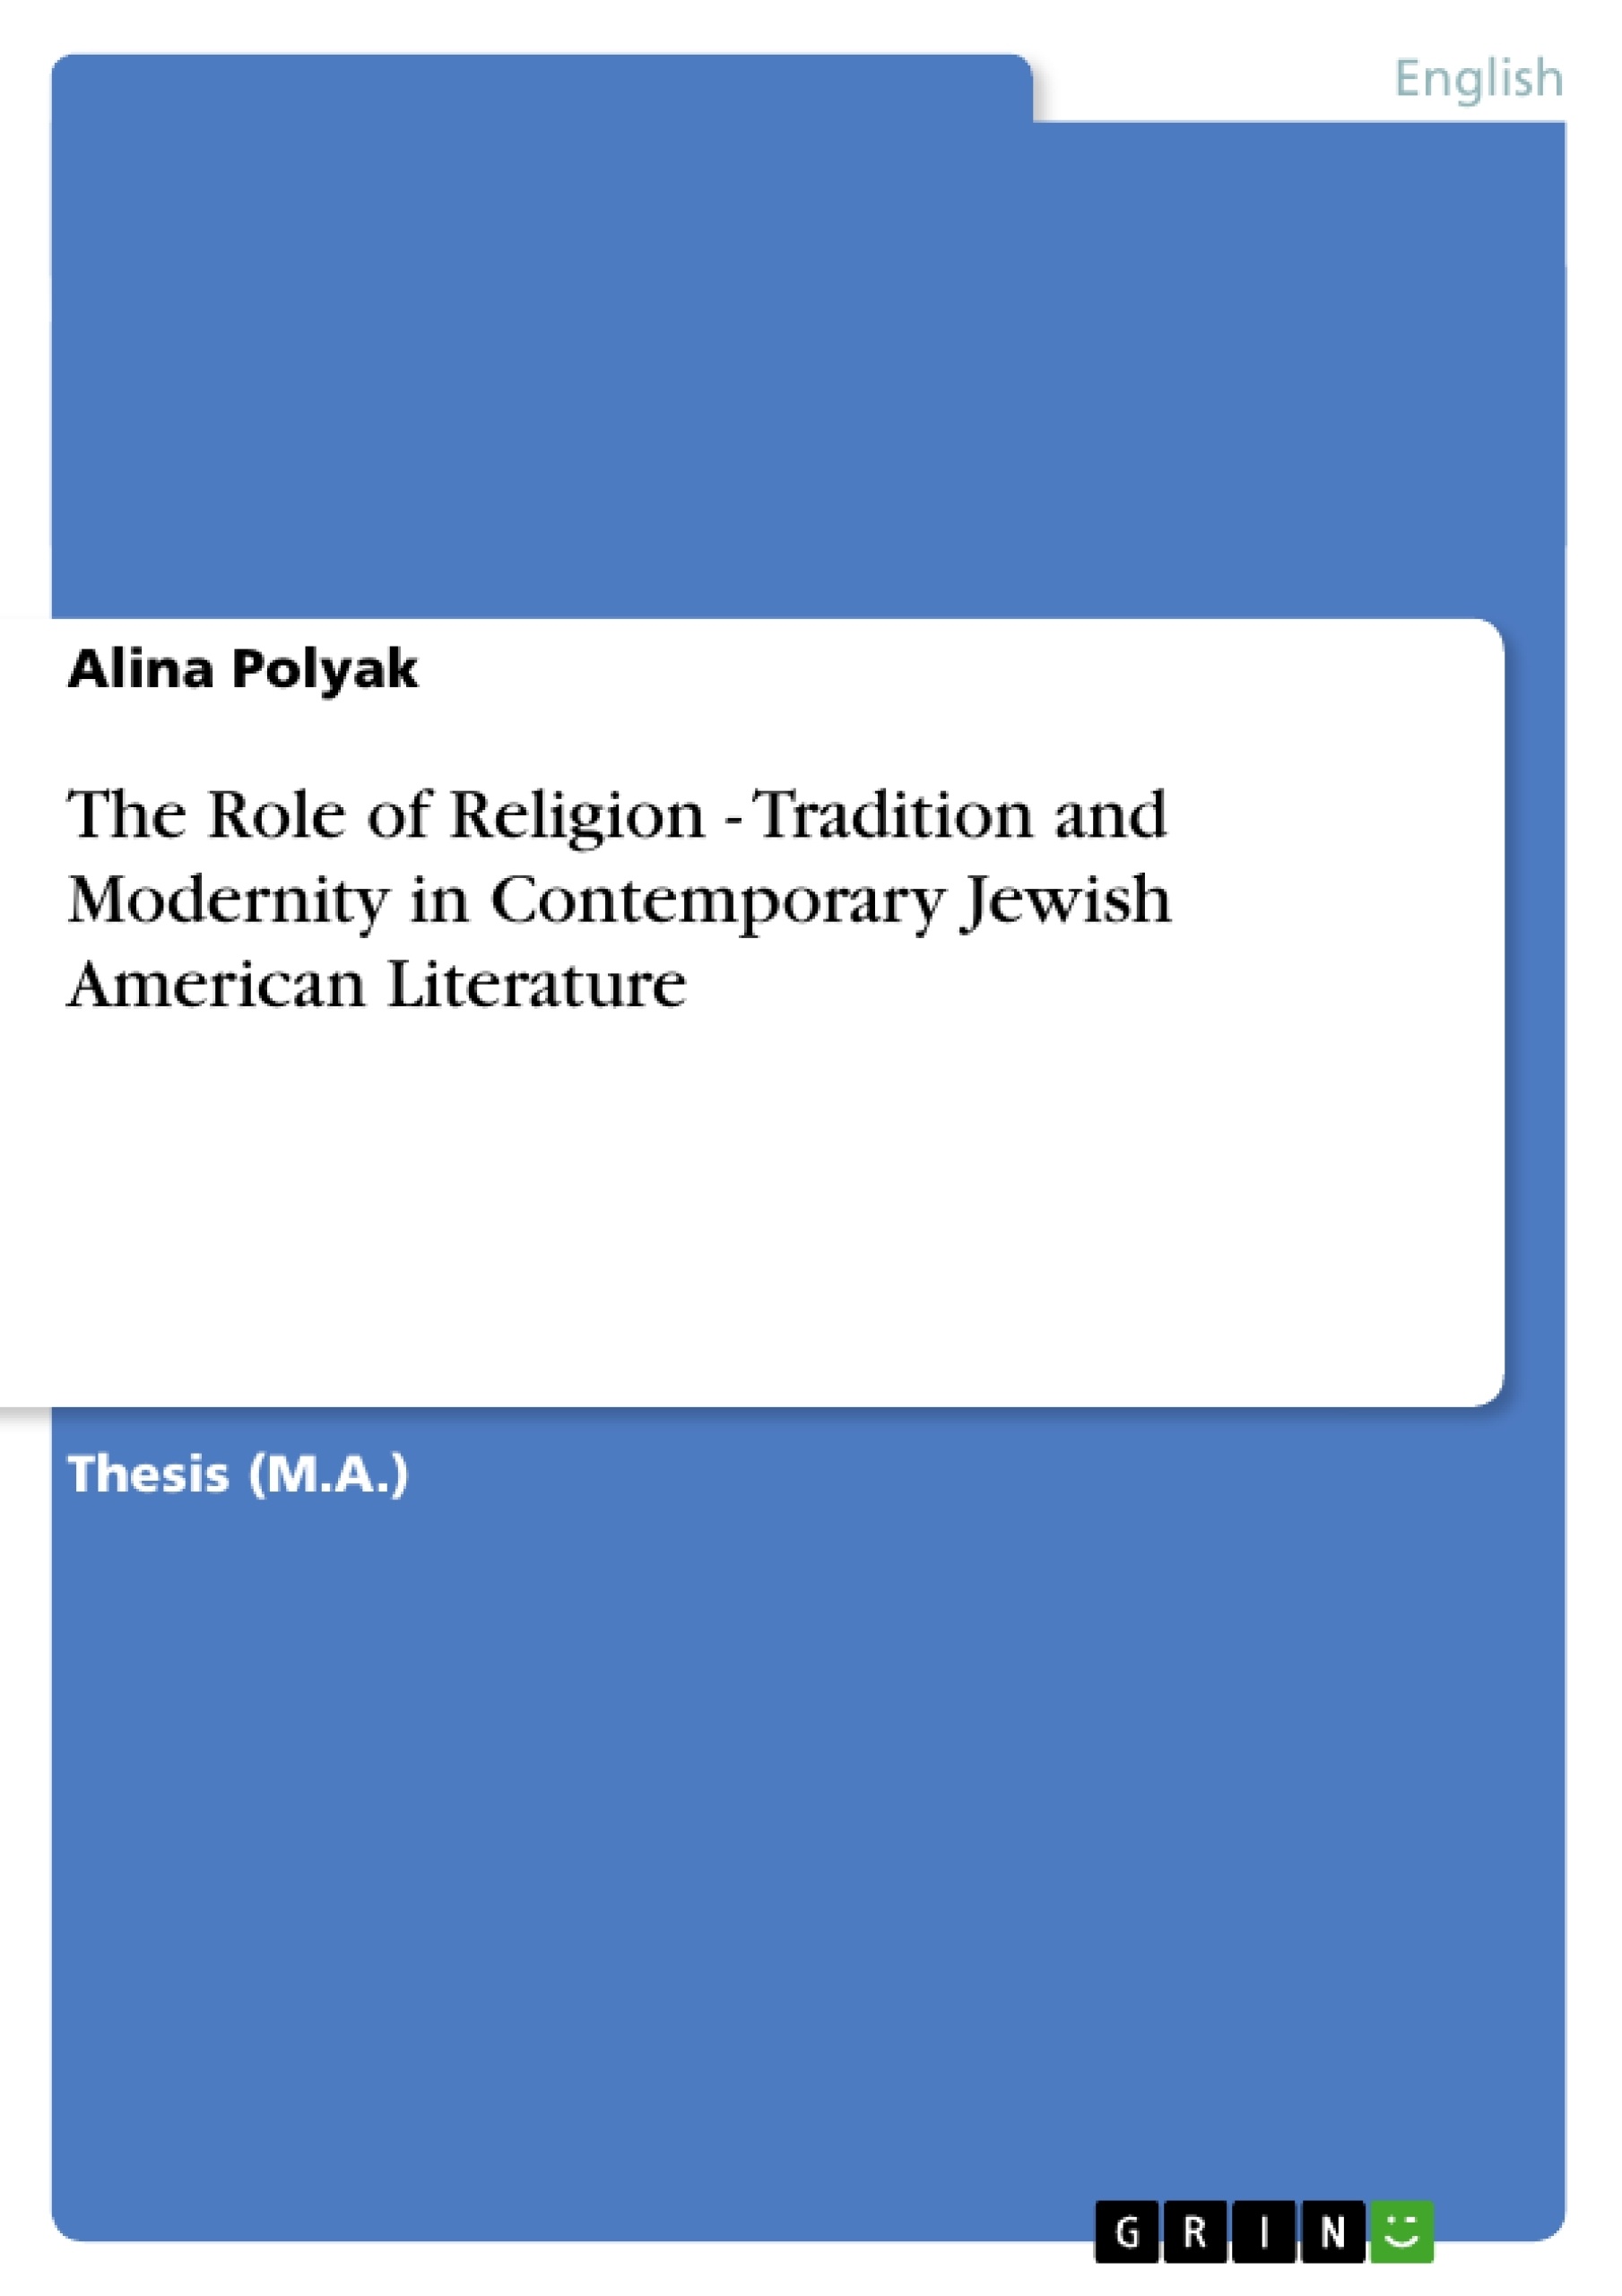 Title: The Role of Religion - Tradition and Modernity in Contemporary Jewish American Literature